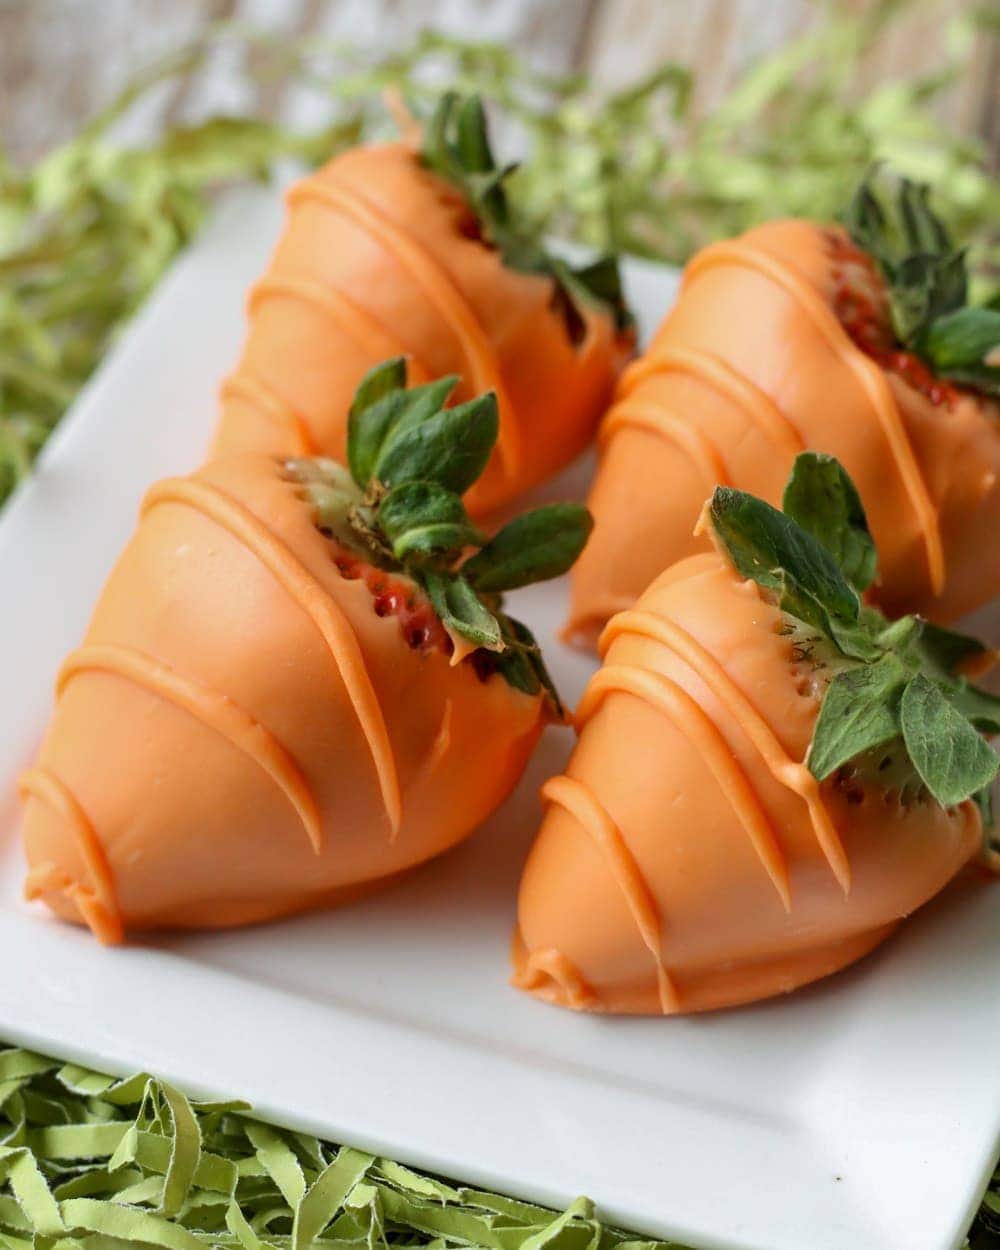 Strawberries dipped in orange candy melts and drizzled with more orange chocolate to look like carrots, all set on a plate.